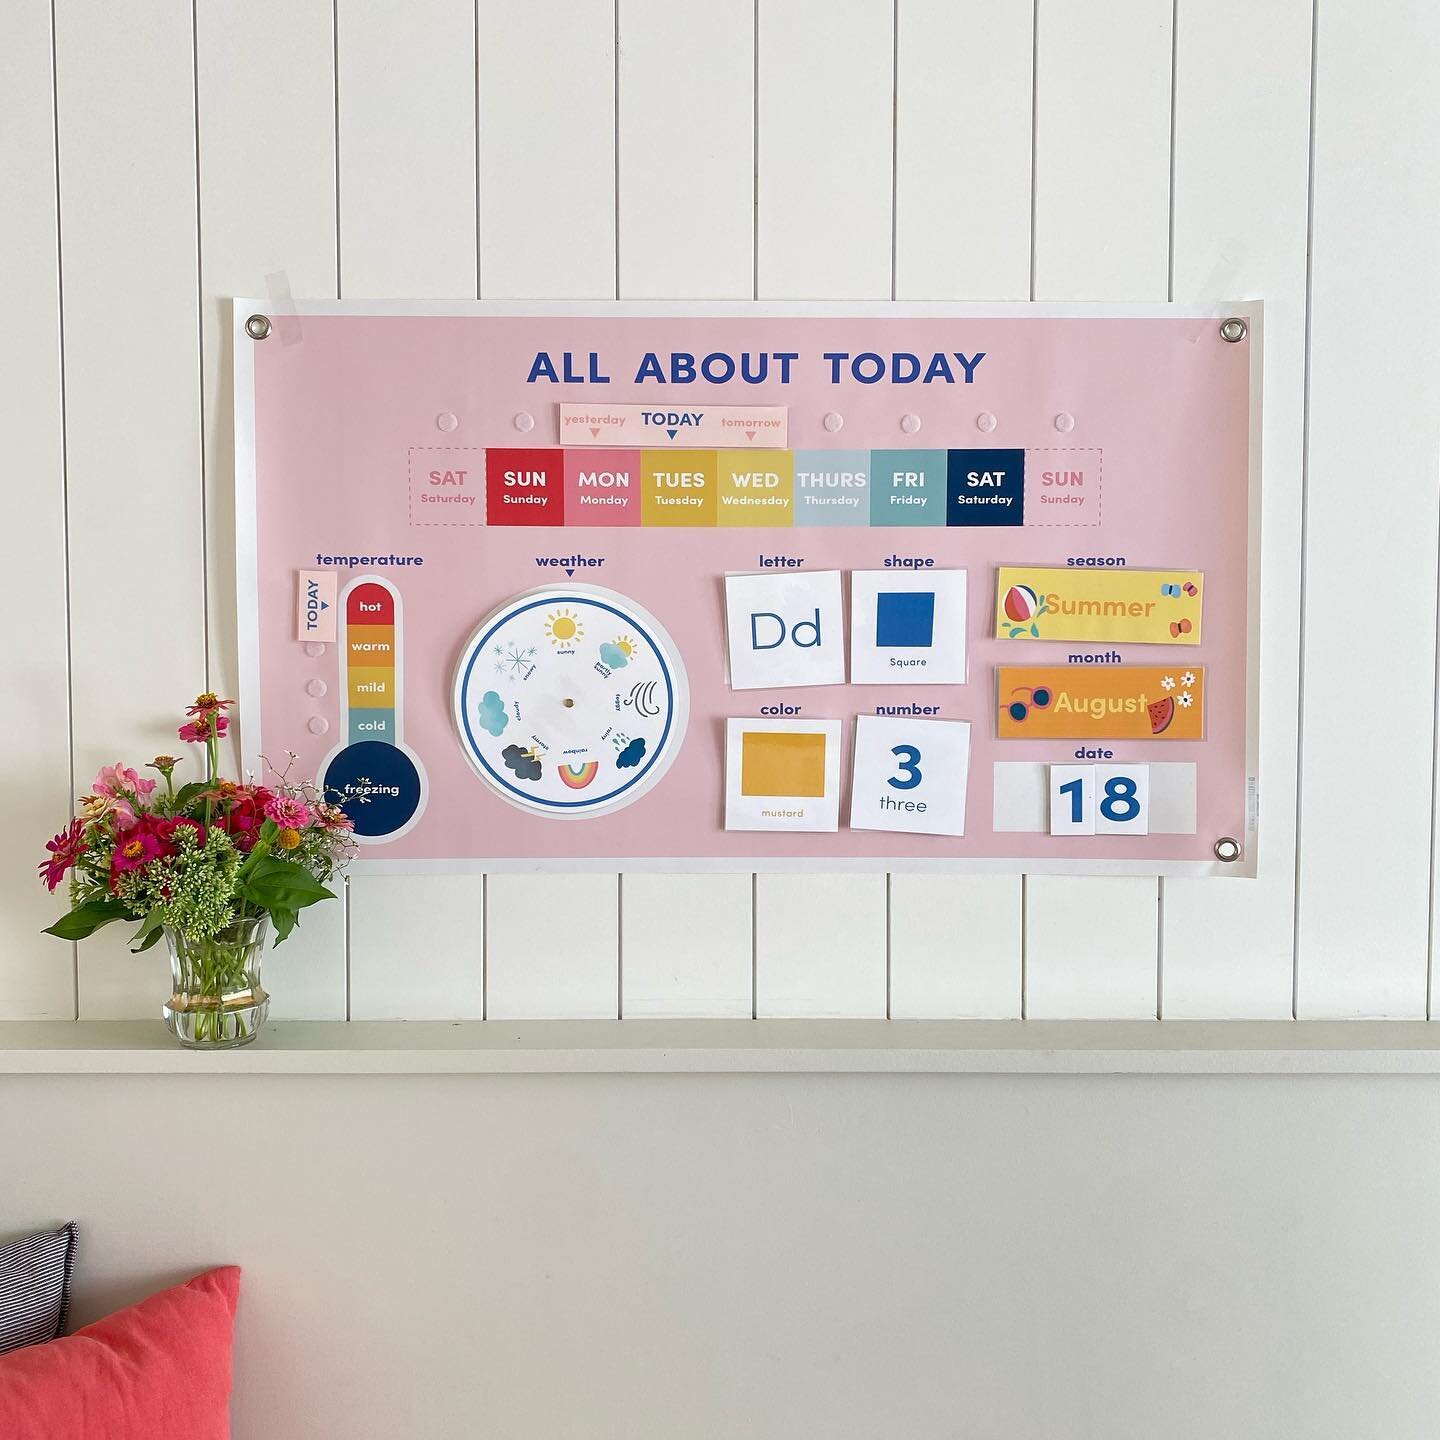 ✨School Sale ✨
I&rsquo;ve added a couple of items to the shop including this All About Today chart! Use promo code SCHOOL25 for a 25% discount at checkout. 

👉Sale ends 8/10